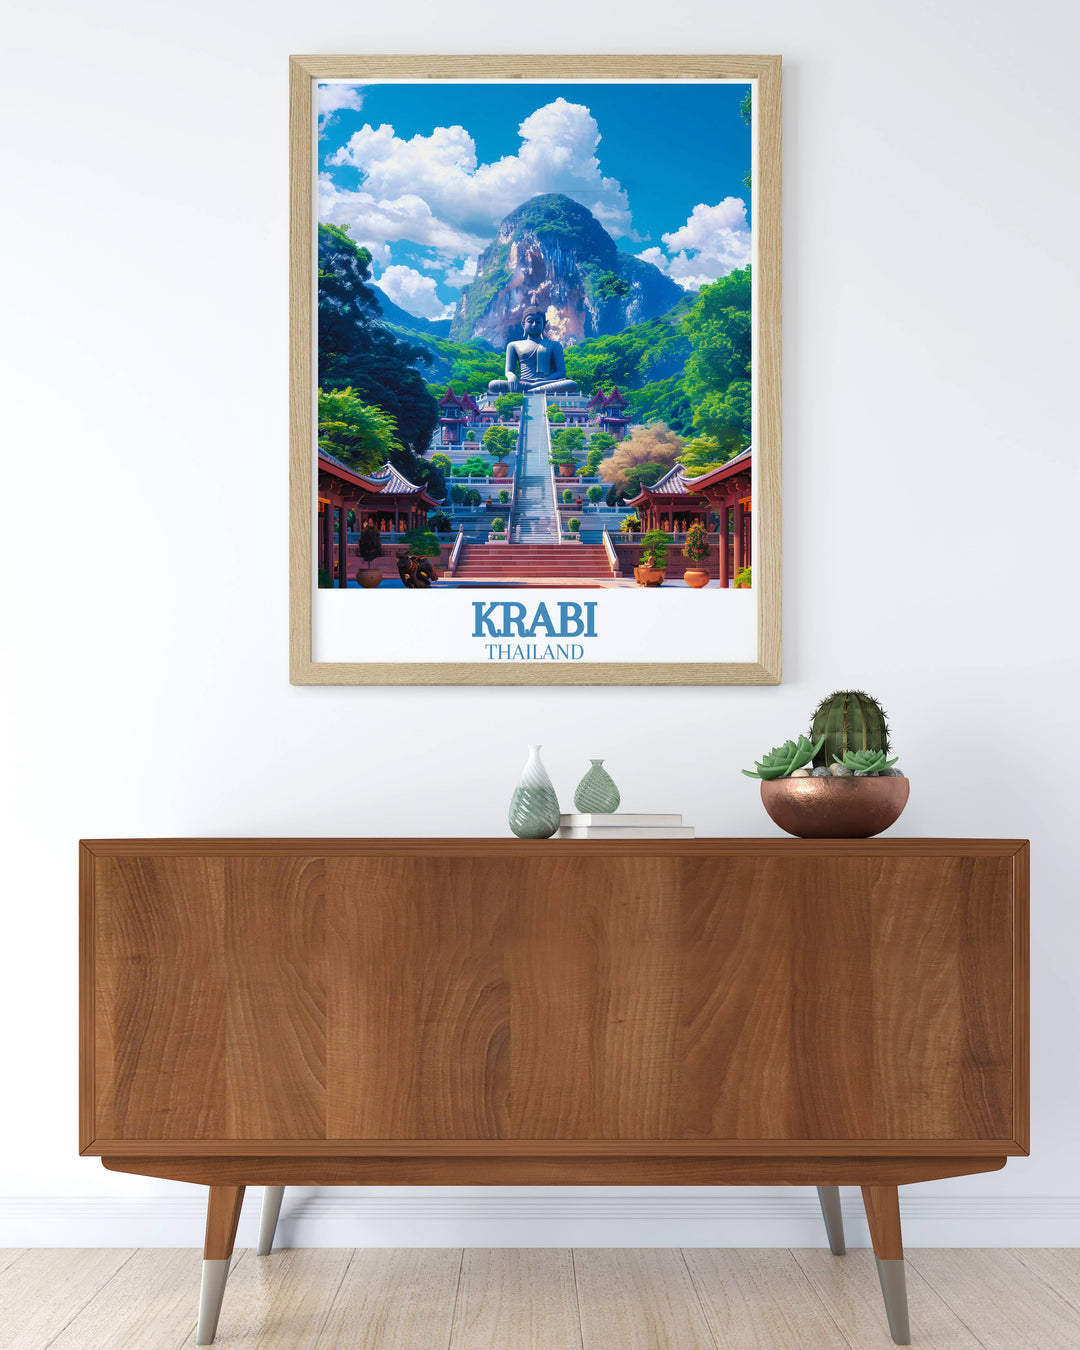 Enhance your living space with the breathtaking scenery of Krabi Island and Tiger Cave Temple depicted in this exquisite wall art print featuring tranquil beaches and mystical temple views perfect for any room and a wonderful Thailand travel gift.